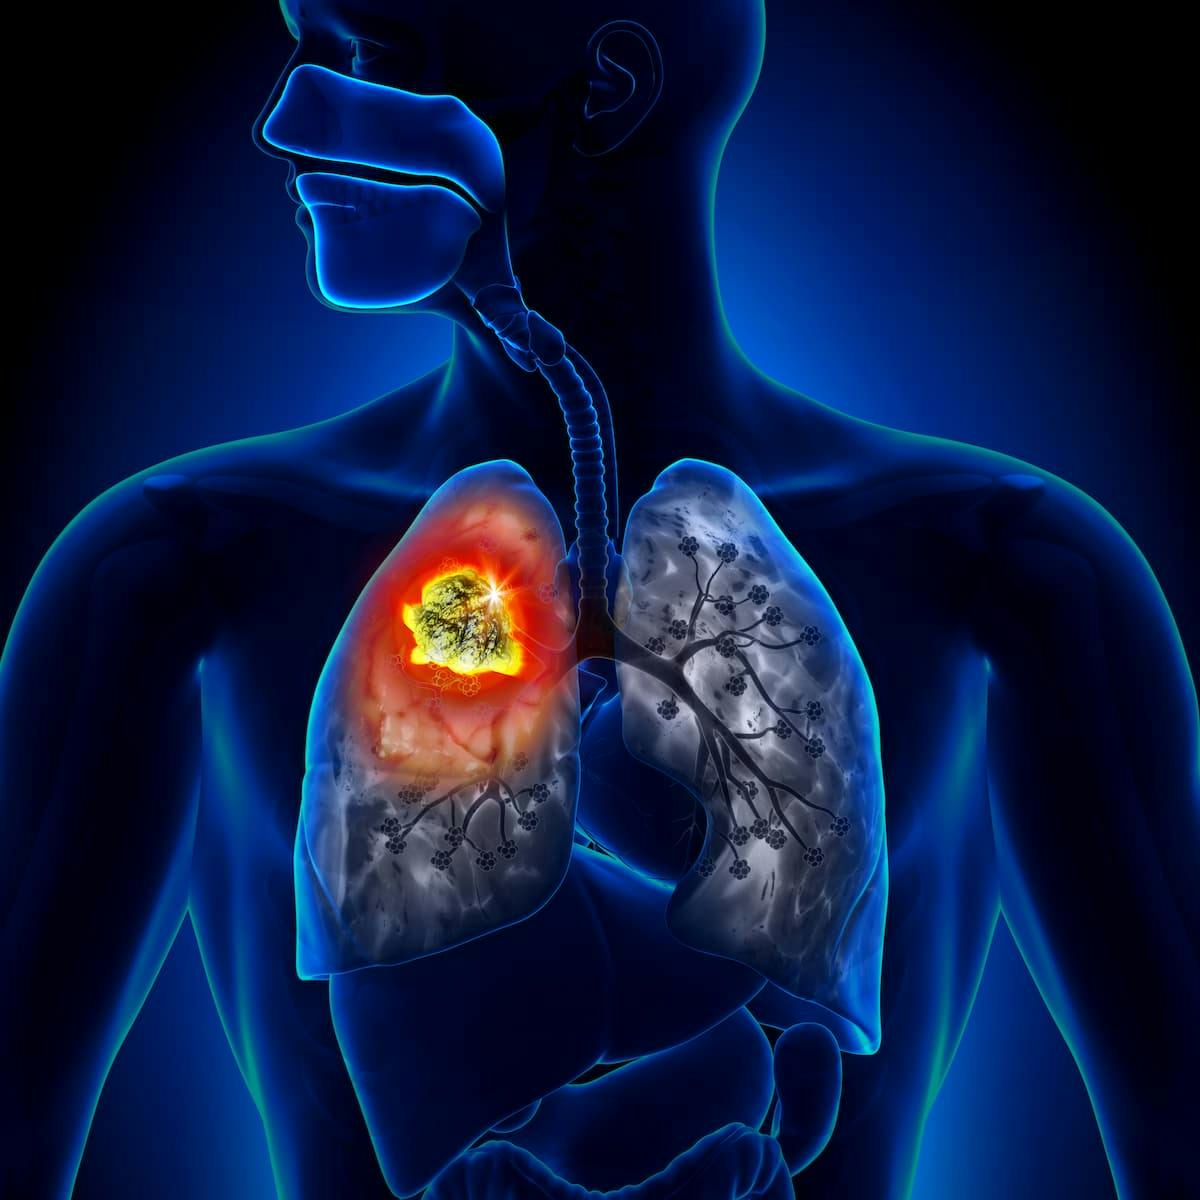 The European Medicine Agency’s Committee for Medicinal Products for Human Use issued a positive opinion on the approval of pembrolizumab/chemotherapy for patients with resectable NSCLC in February 2024.